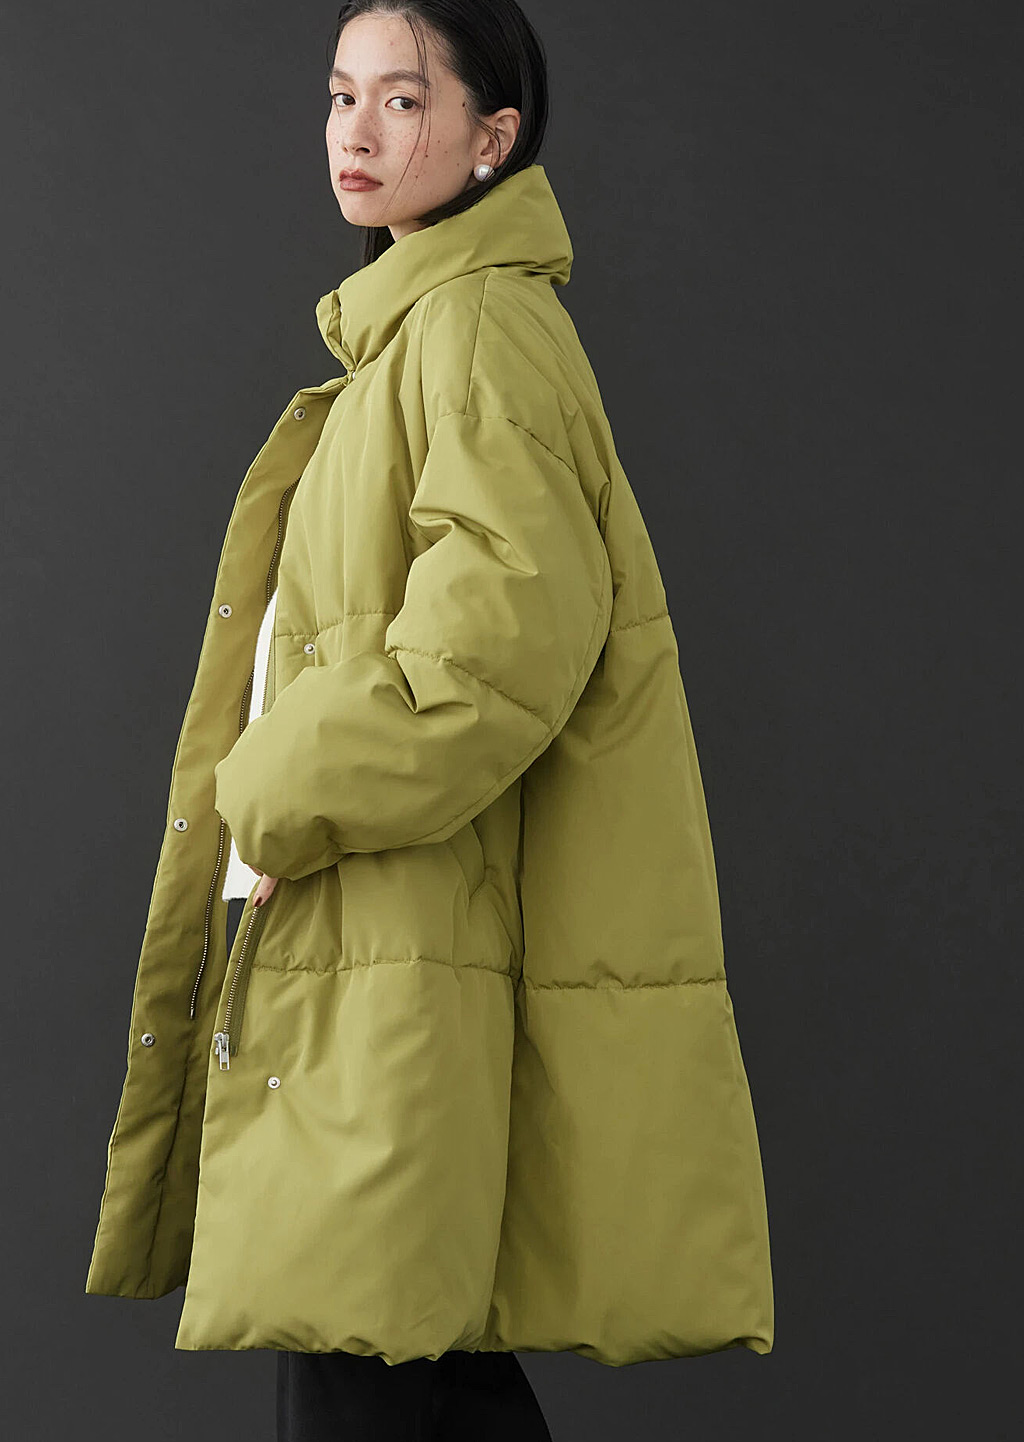 Warm-High-Neck-Cotton-Coat-by-American-Holic_1 - Savvy Tokyo